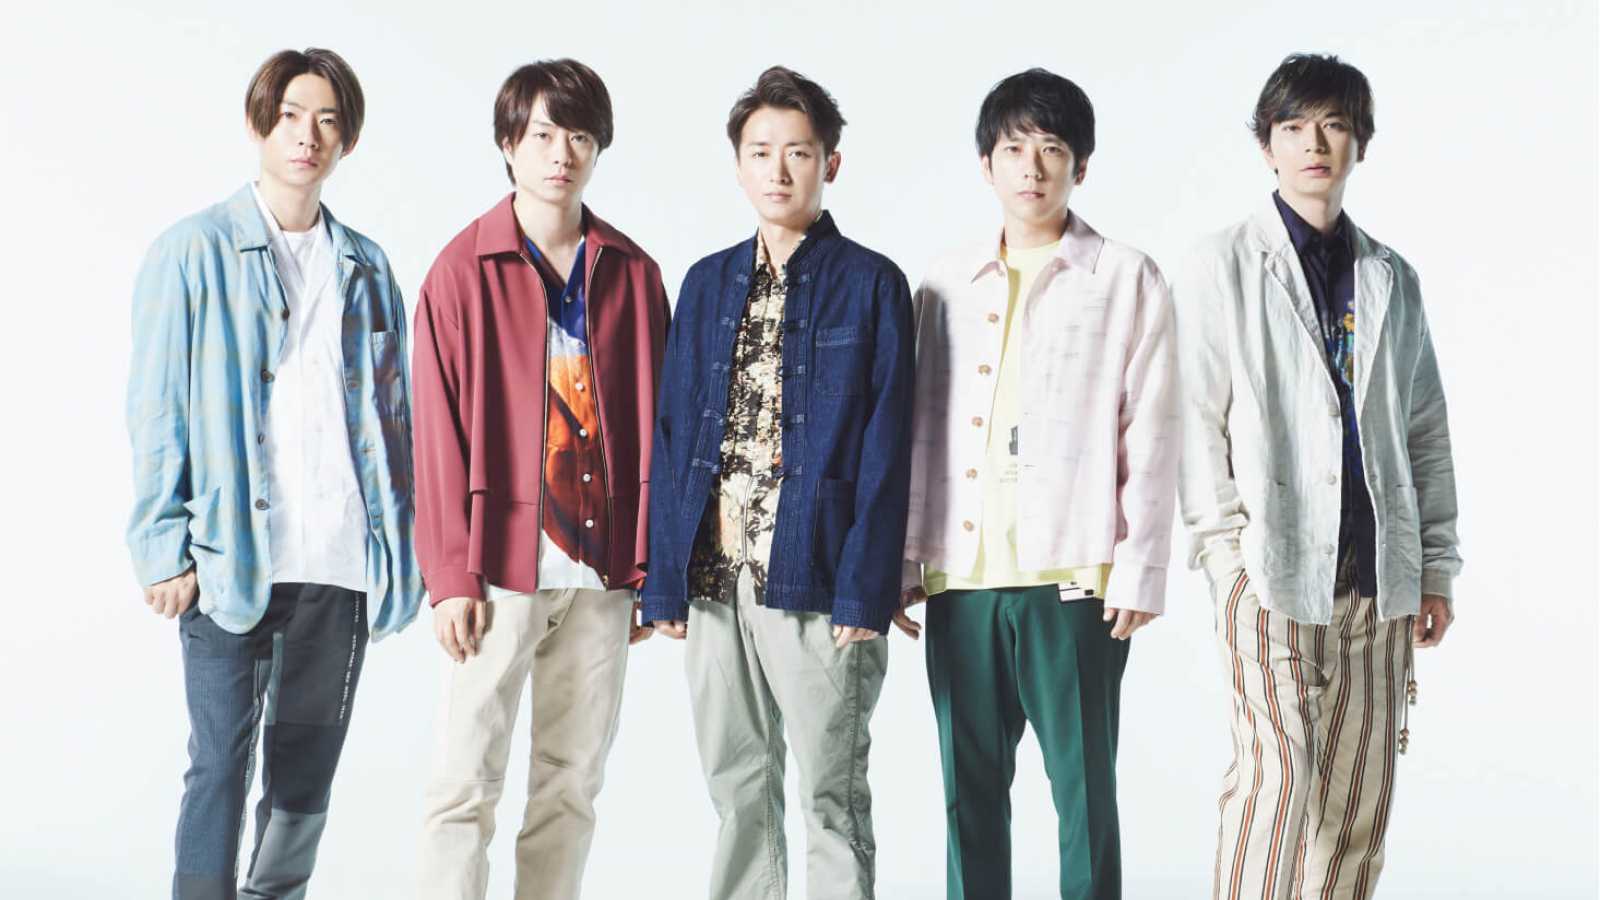 New Singles from ARASHI © JStorm. All rights reserved.